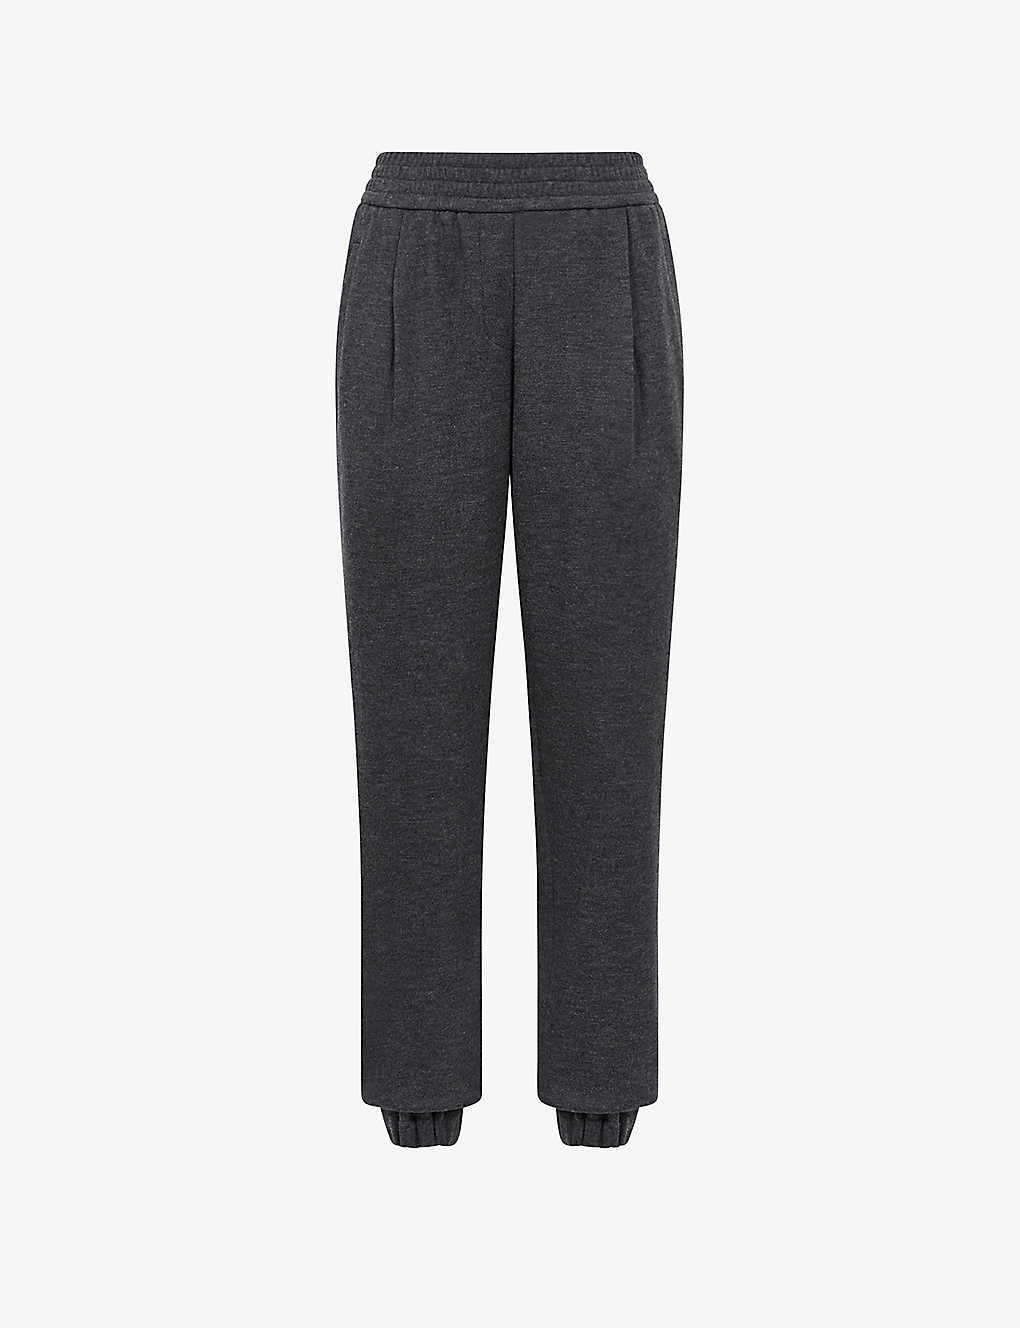 REISS REISS WOMENS CHARCOAL KARINA SLOUCHY-FIT MID-RISE WOOL TROUSERS